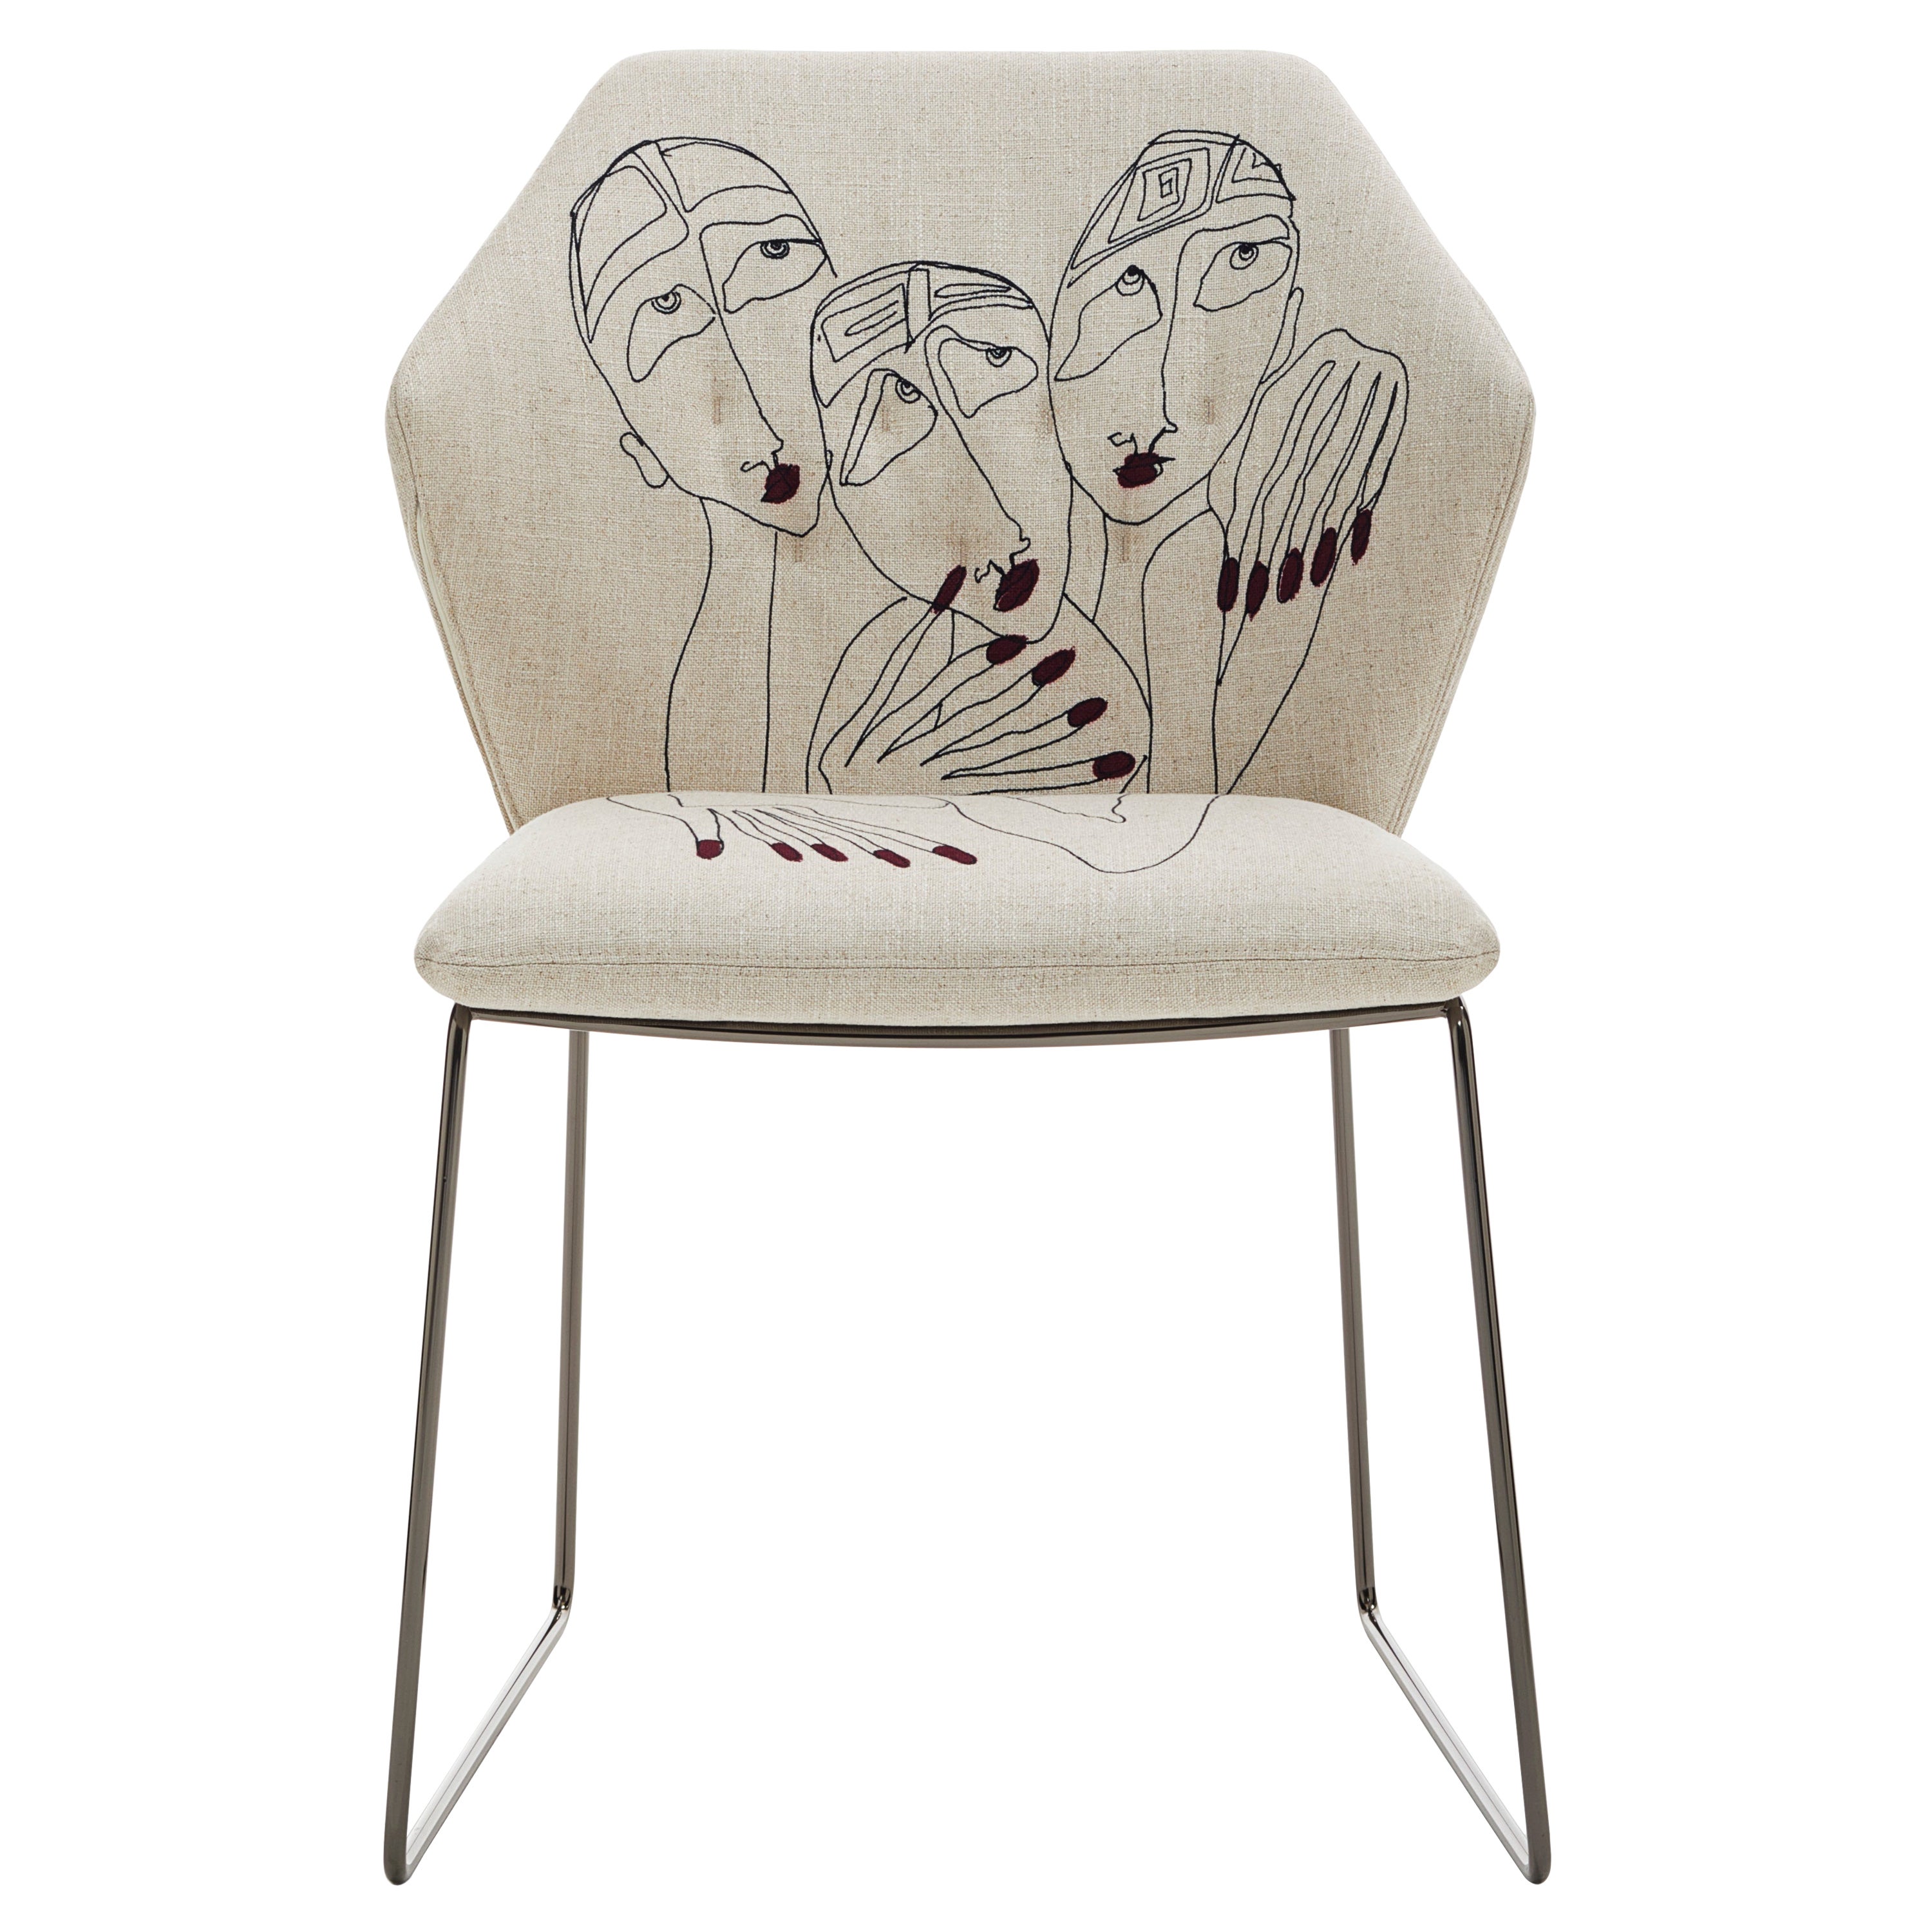 New York Chair 2 by Marras in Beige Upholstery & Nickel Legs by Sergio Bicego